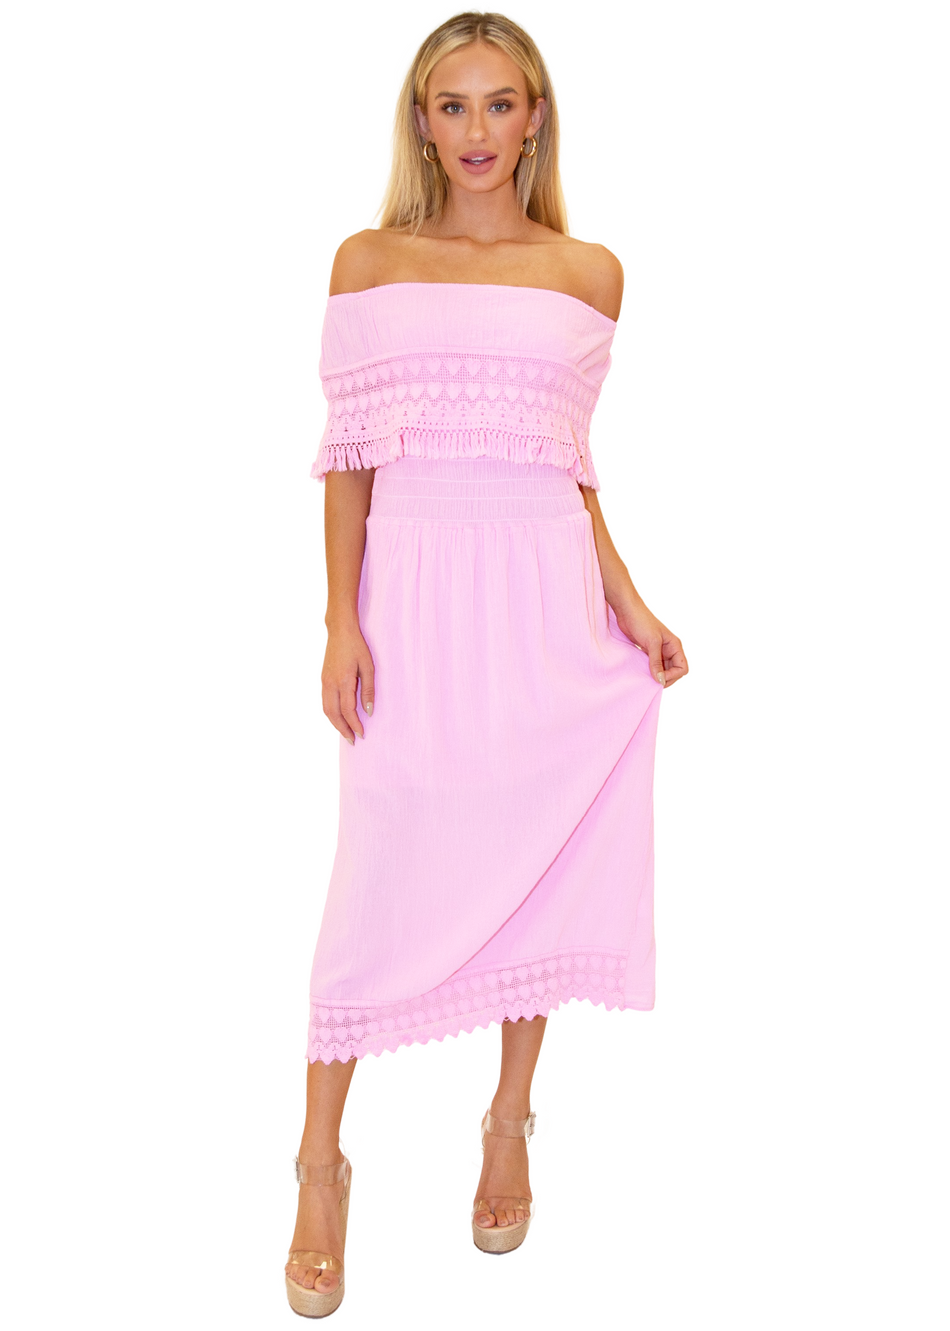 NW1079 - Pink Cotton Dress